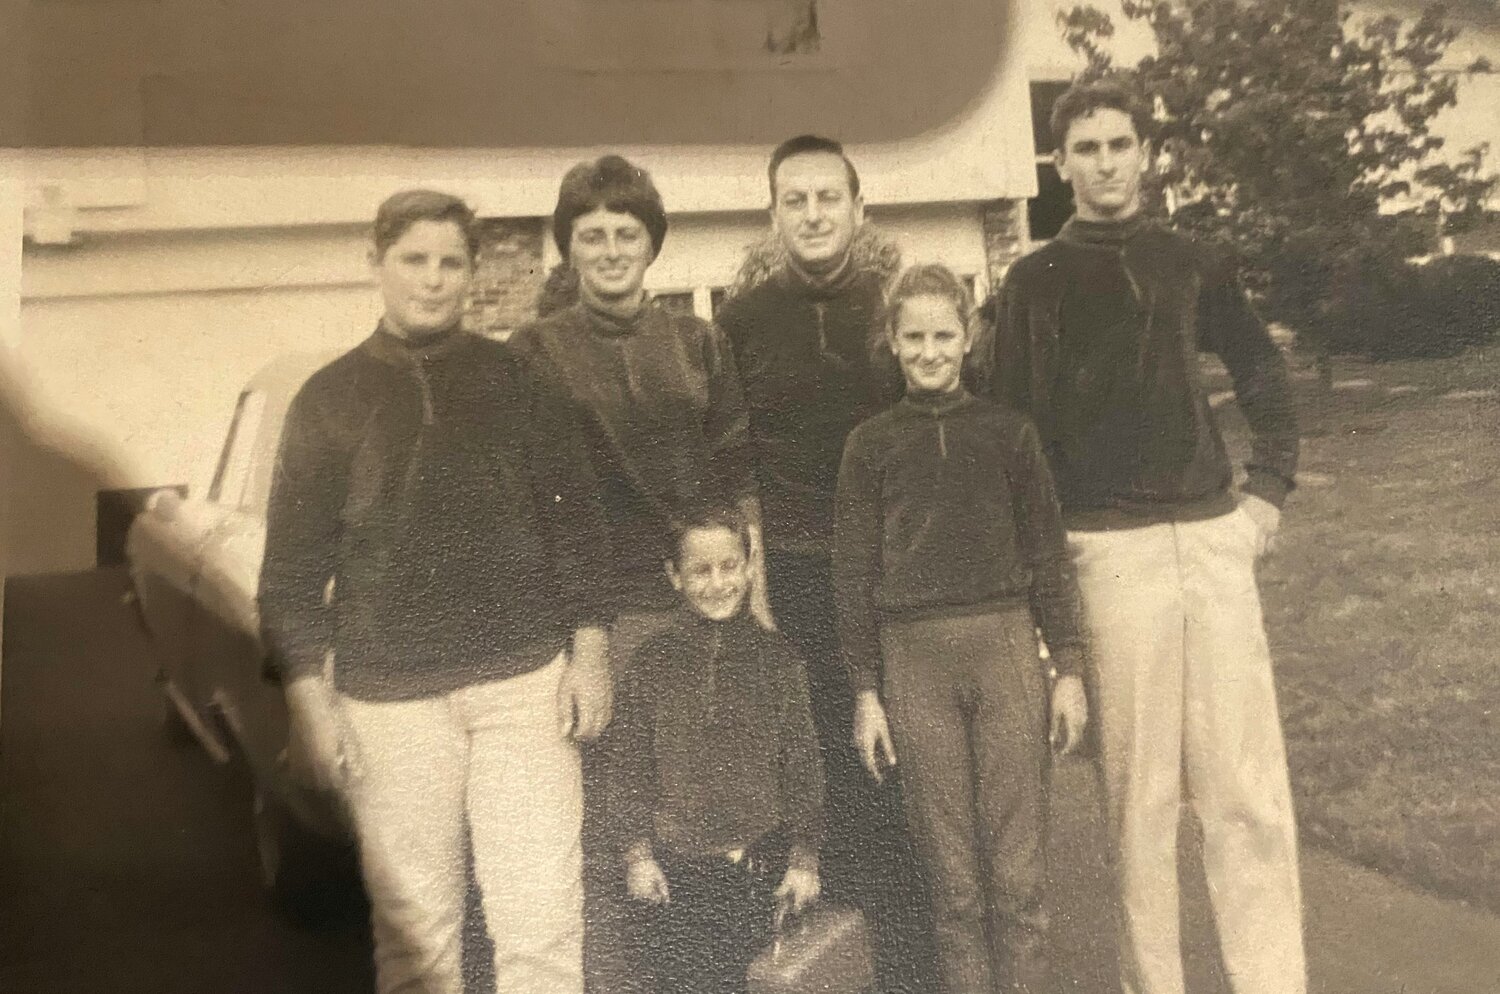 The Teverow family in the mid-1960s. Back,
left to right: Jacqueline, Joseph, and Paul. Front, left to right: Joshua, Philip, and Lee.